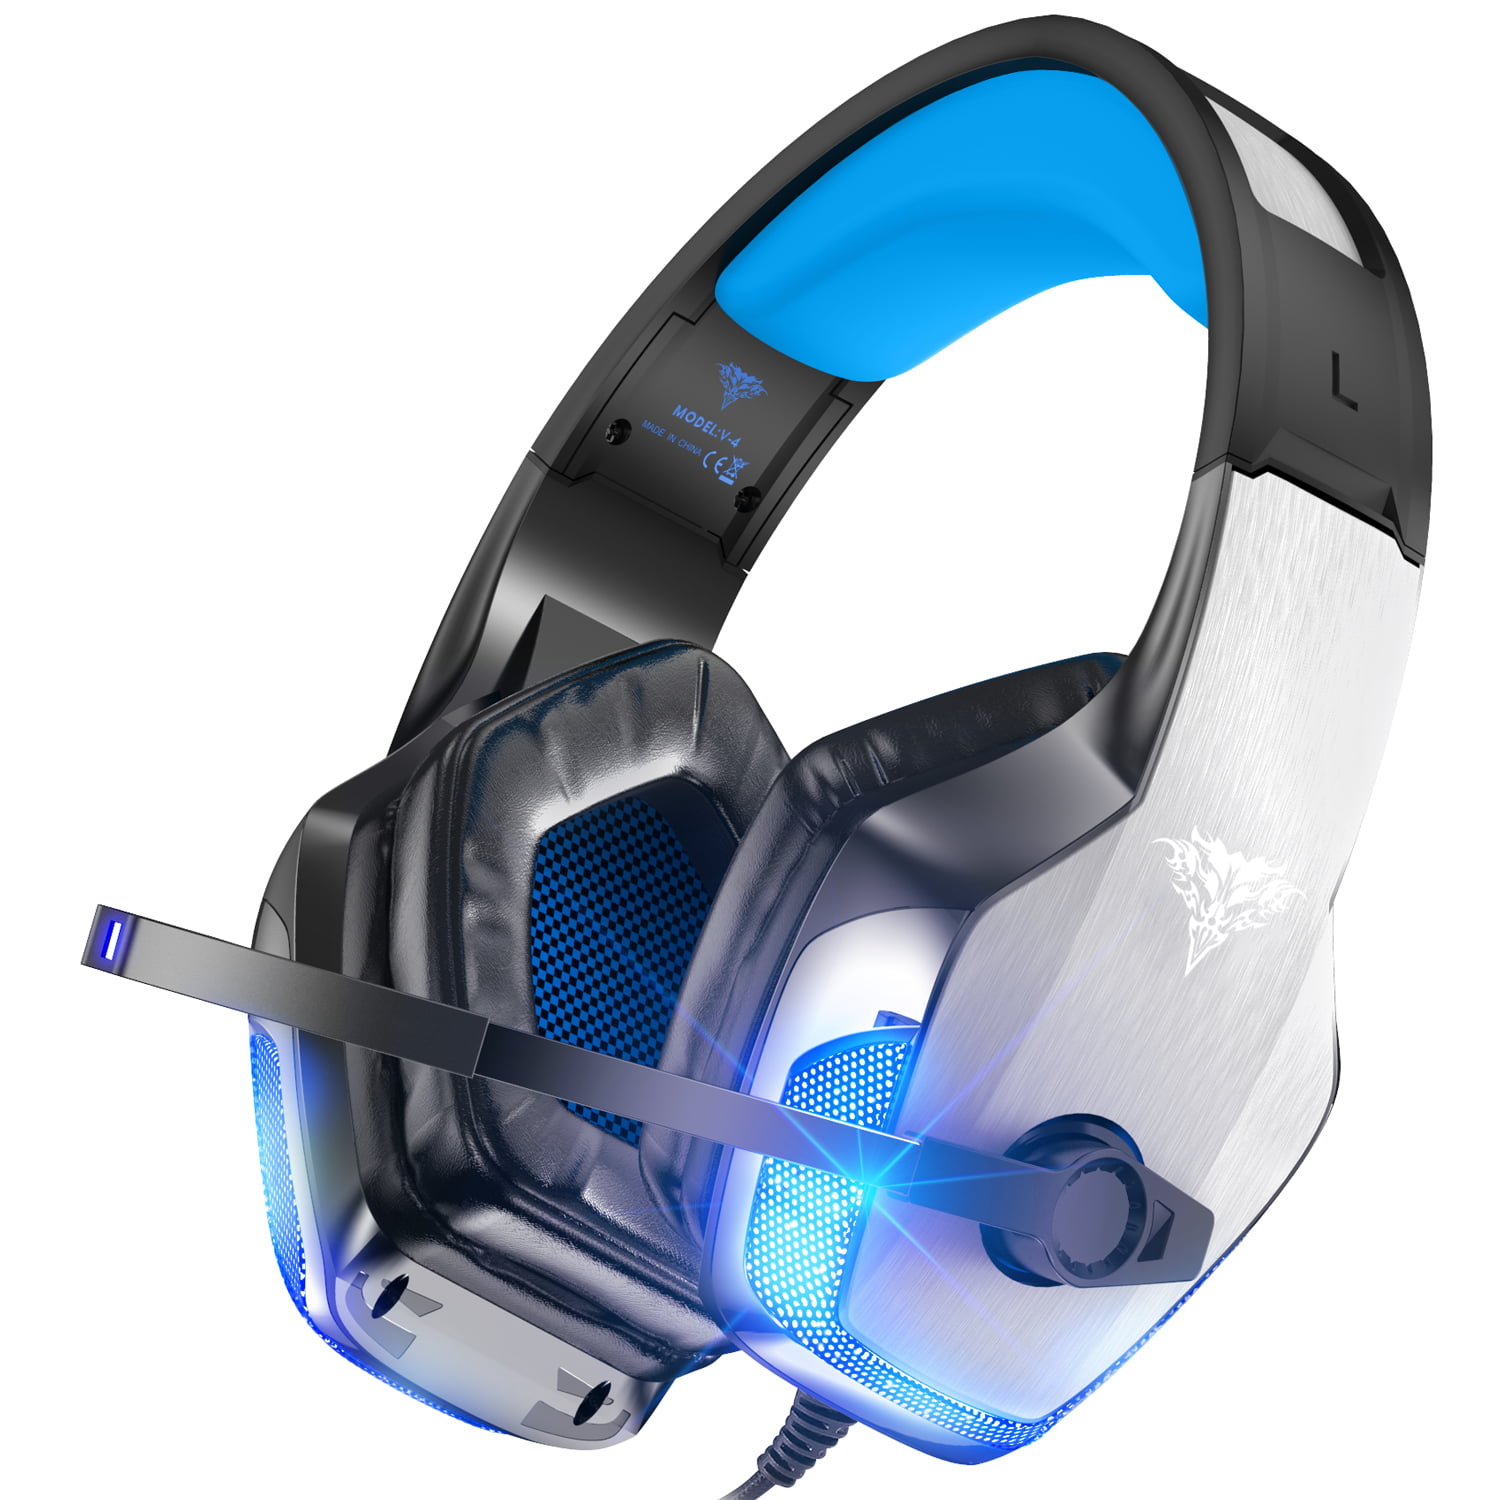 BENGOO V-4 Gaming Headset with Surround Sound